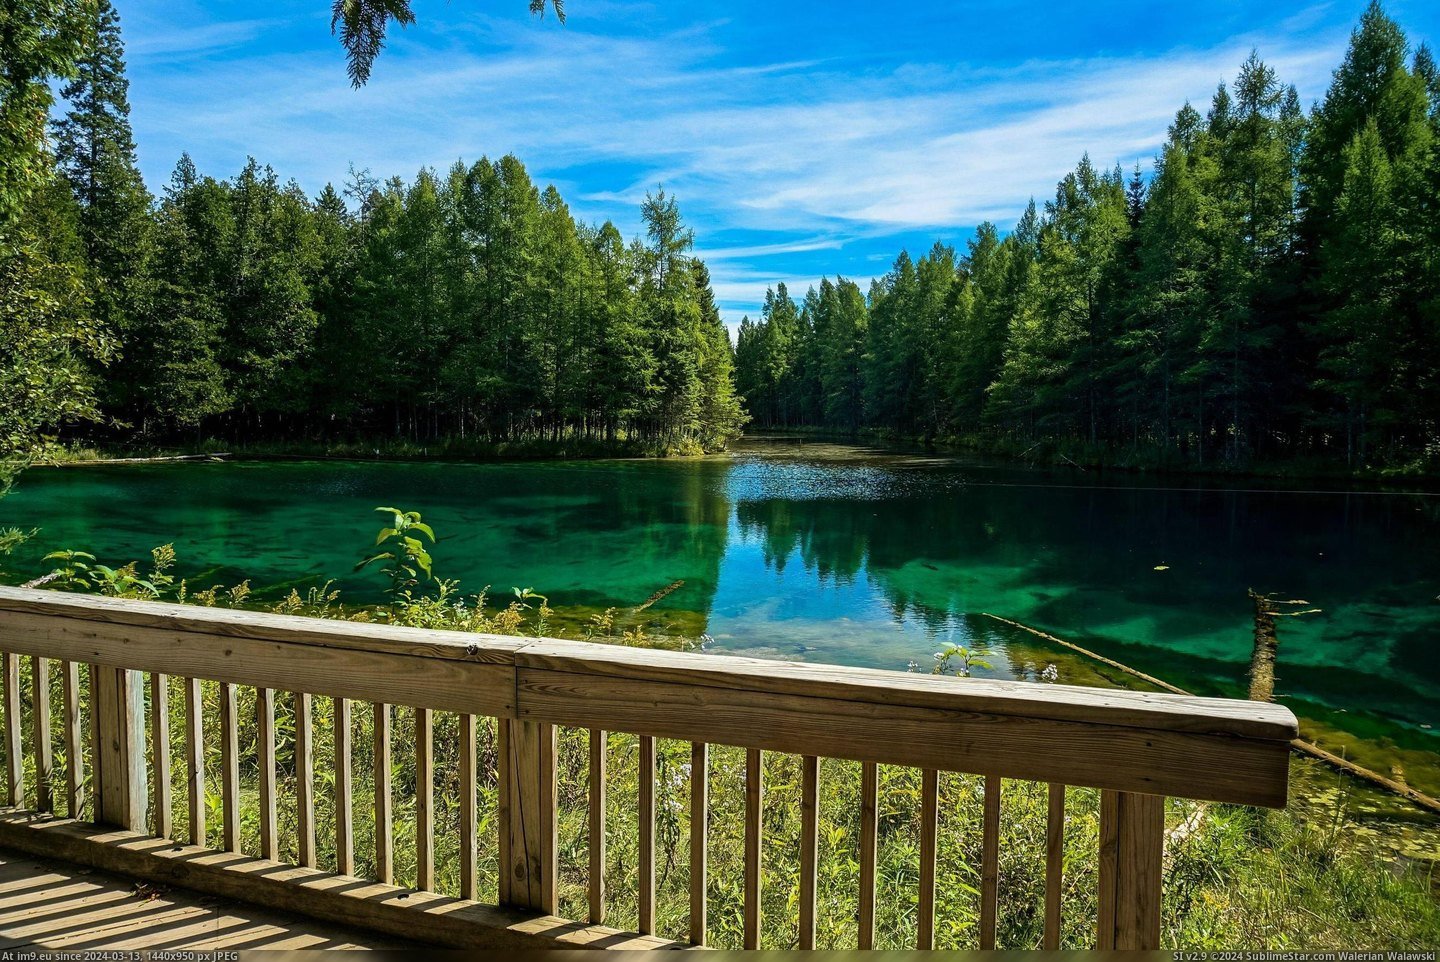 #Mirror #Natural #Early #Called #Americans #Native #Freshwater #Spring #Largest #Heaven #Michigan [Pics] Michigan's largest natural freshwater spring, early Native Americans called it the 'Mirror of Heaven.' Pic. (Image of album My r/PICS favs))